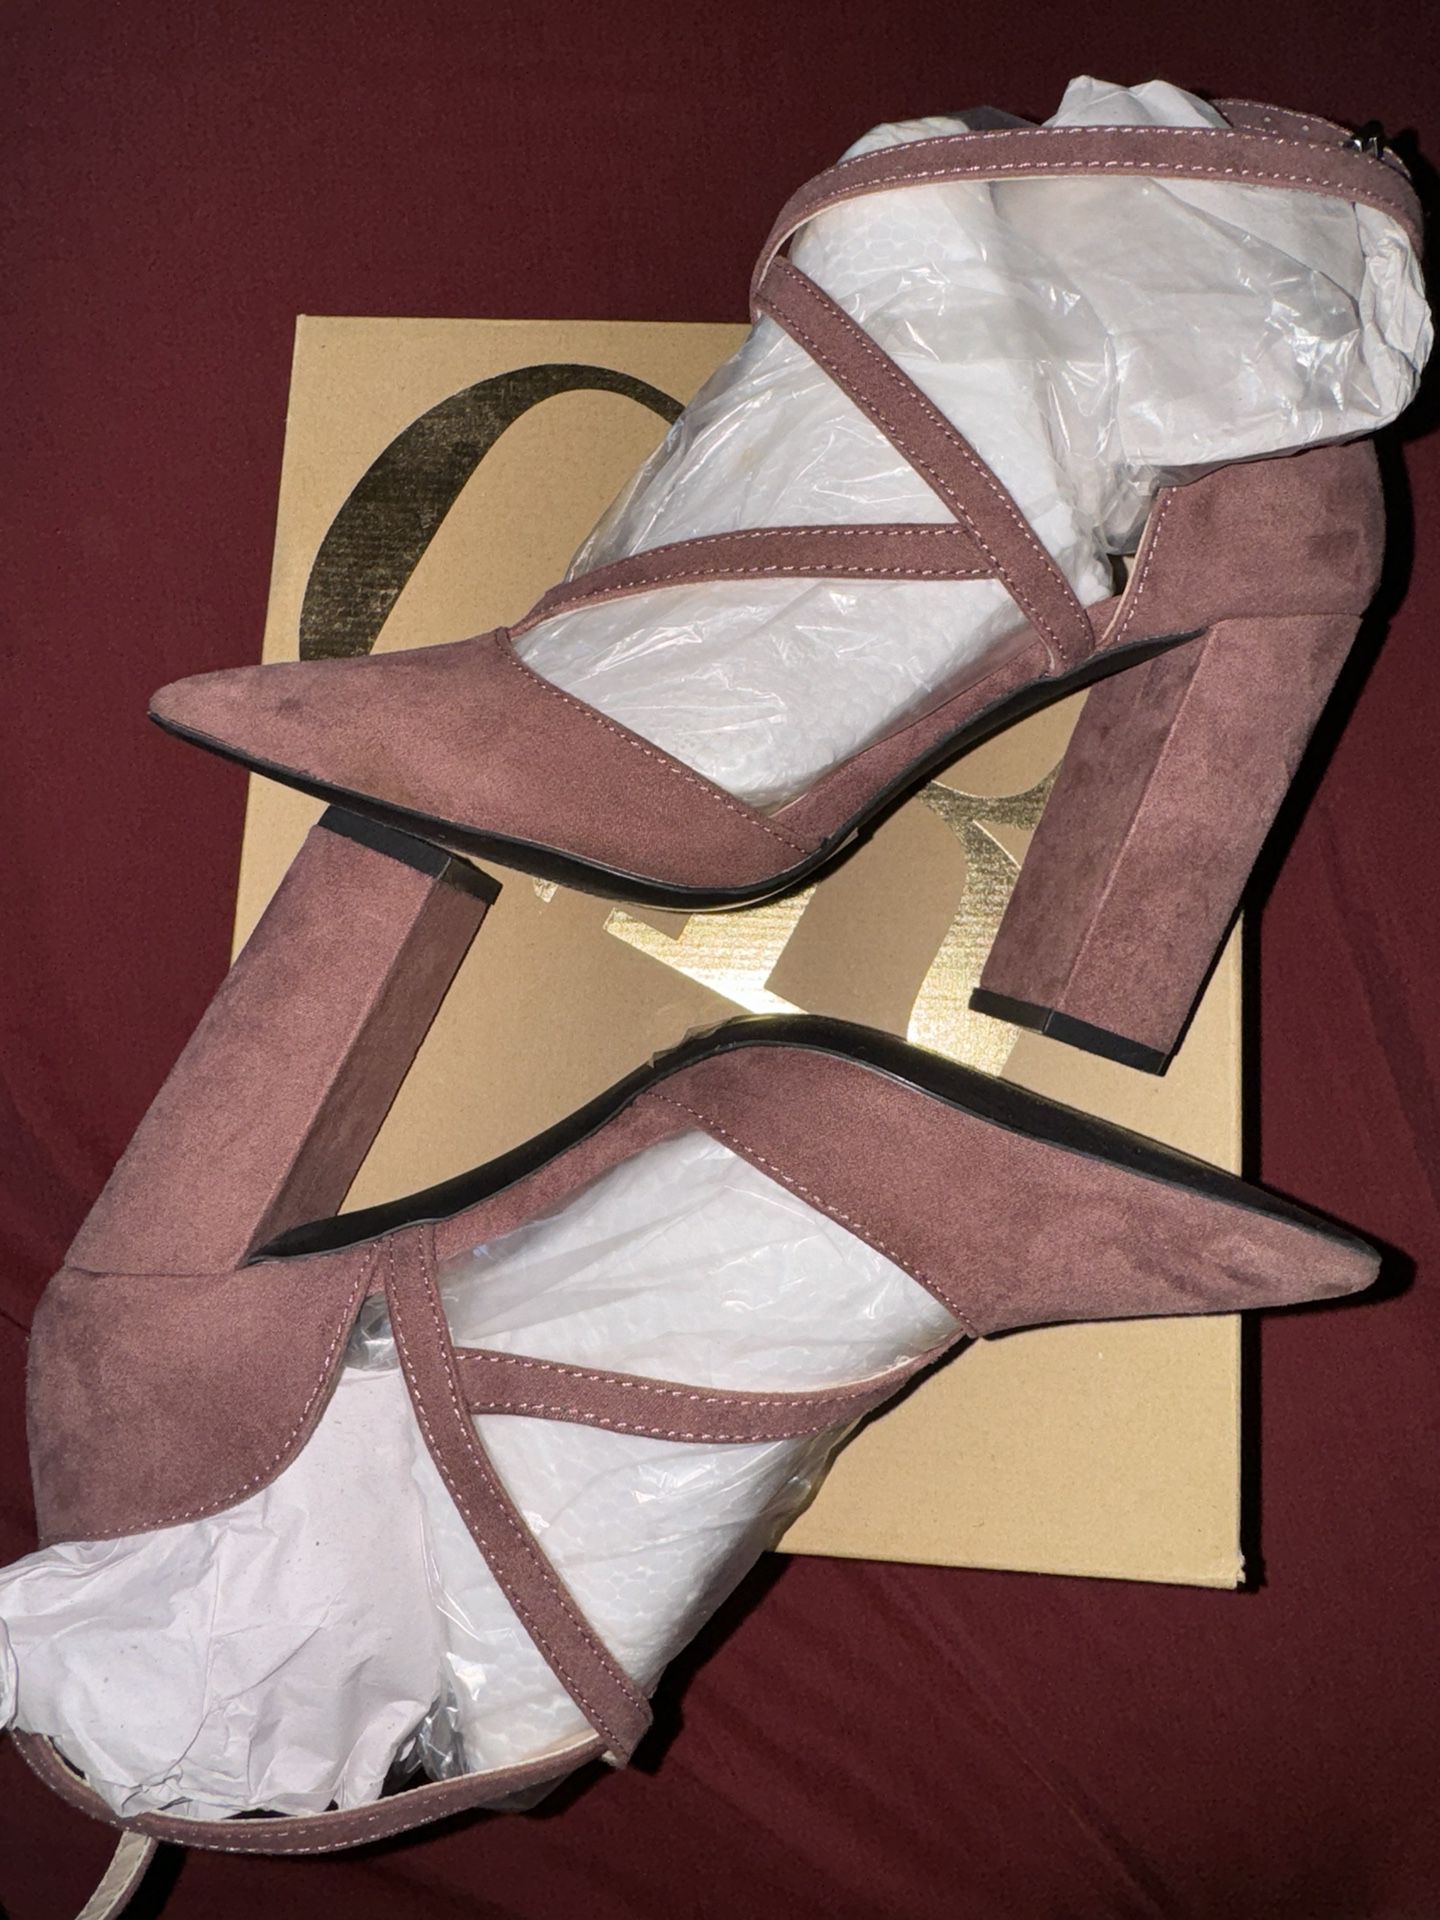 Charlotte Russe rose taupe  size 7, women’s high heel shoes